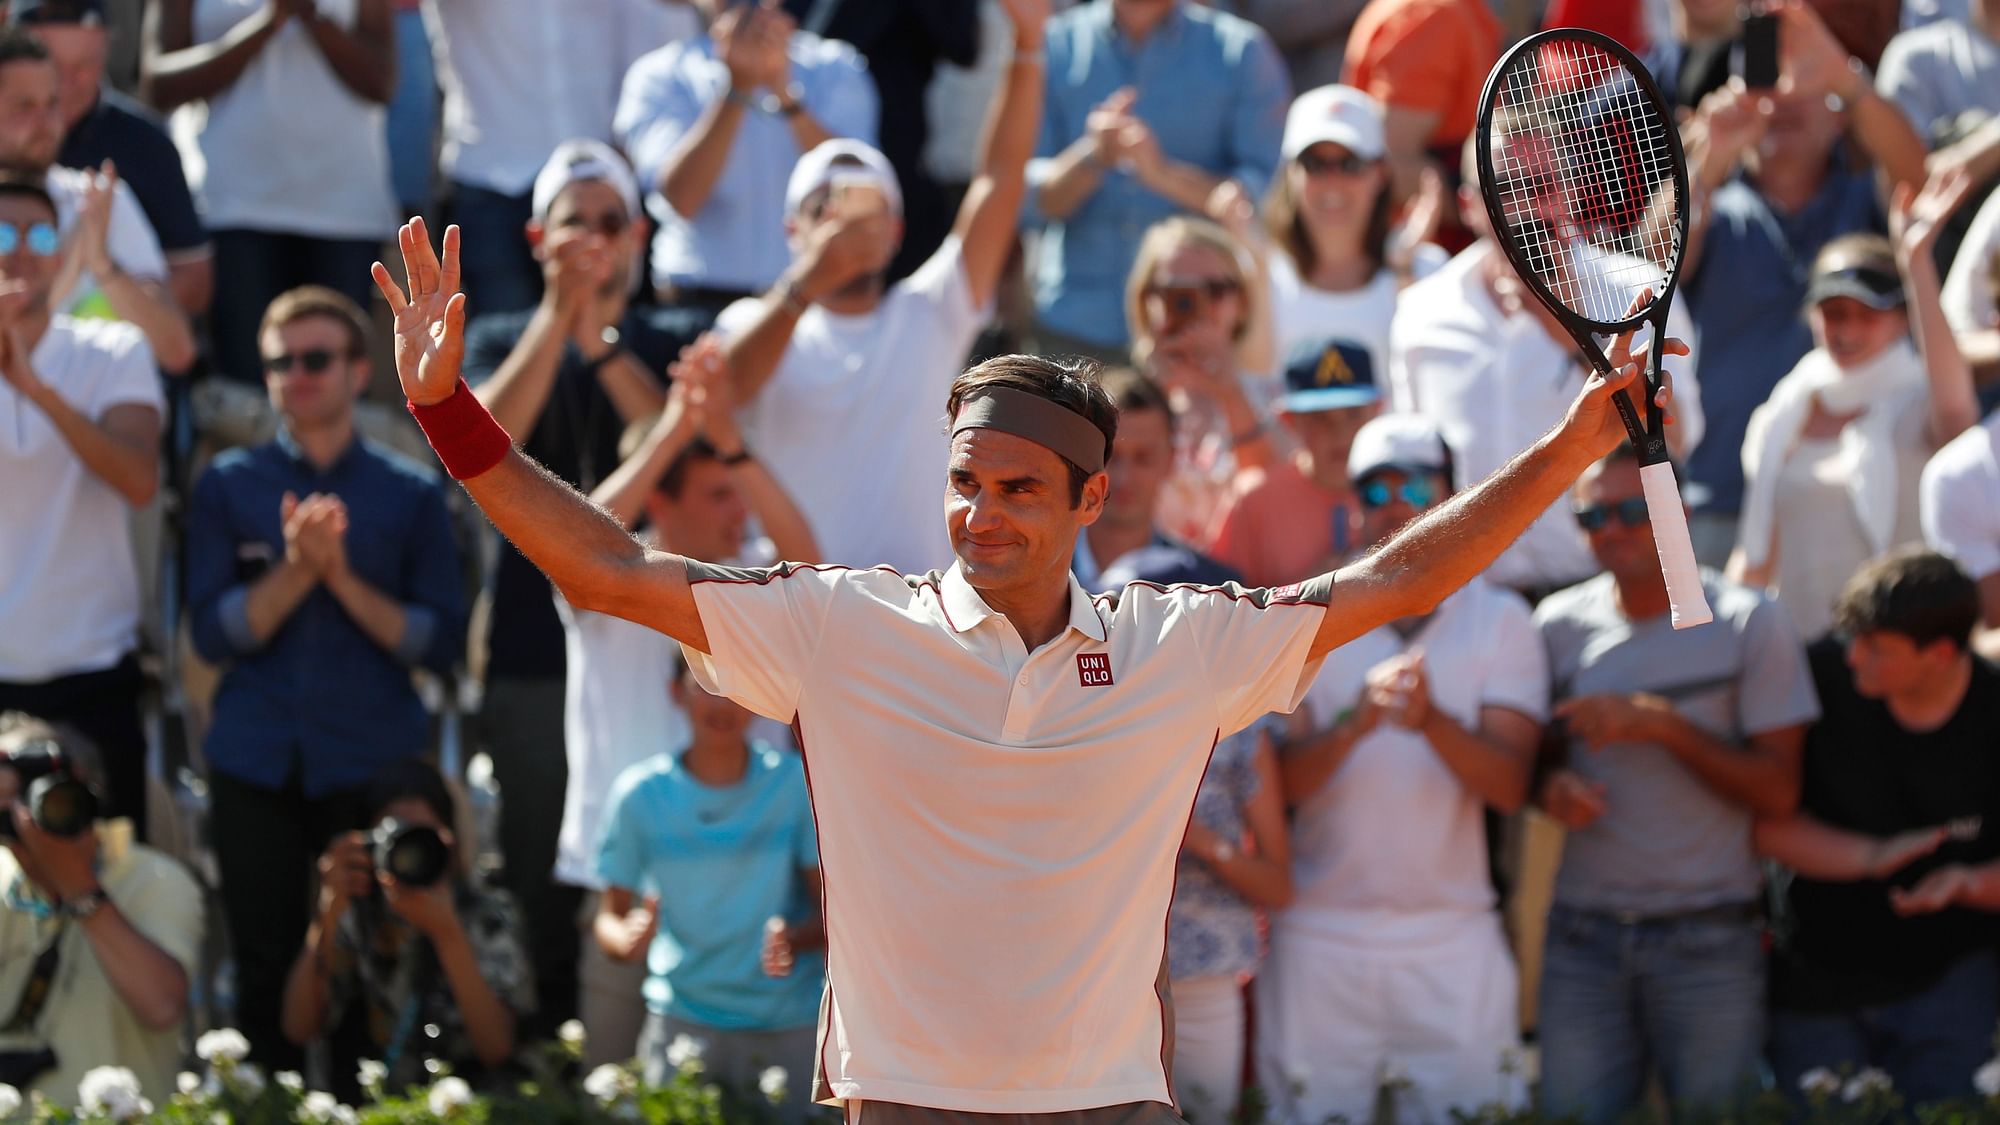 Federer became the oldest player in 28 years to reach the French Open Quarter Finals.